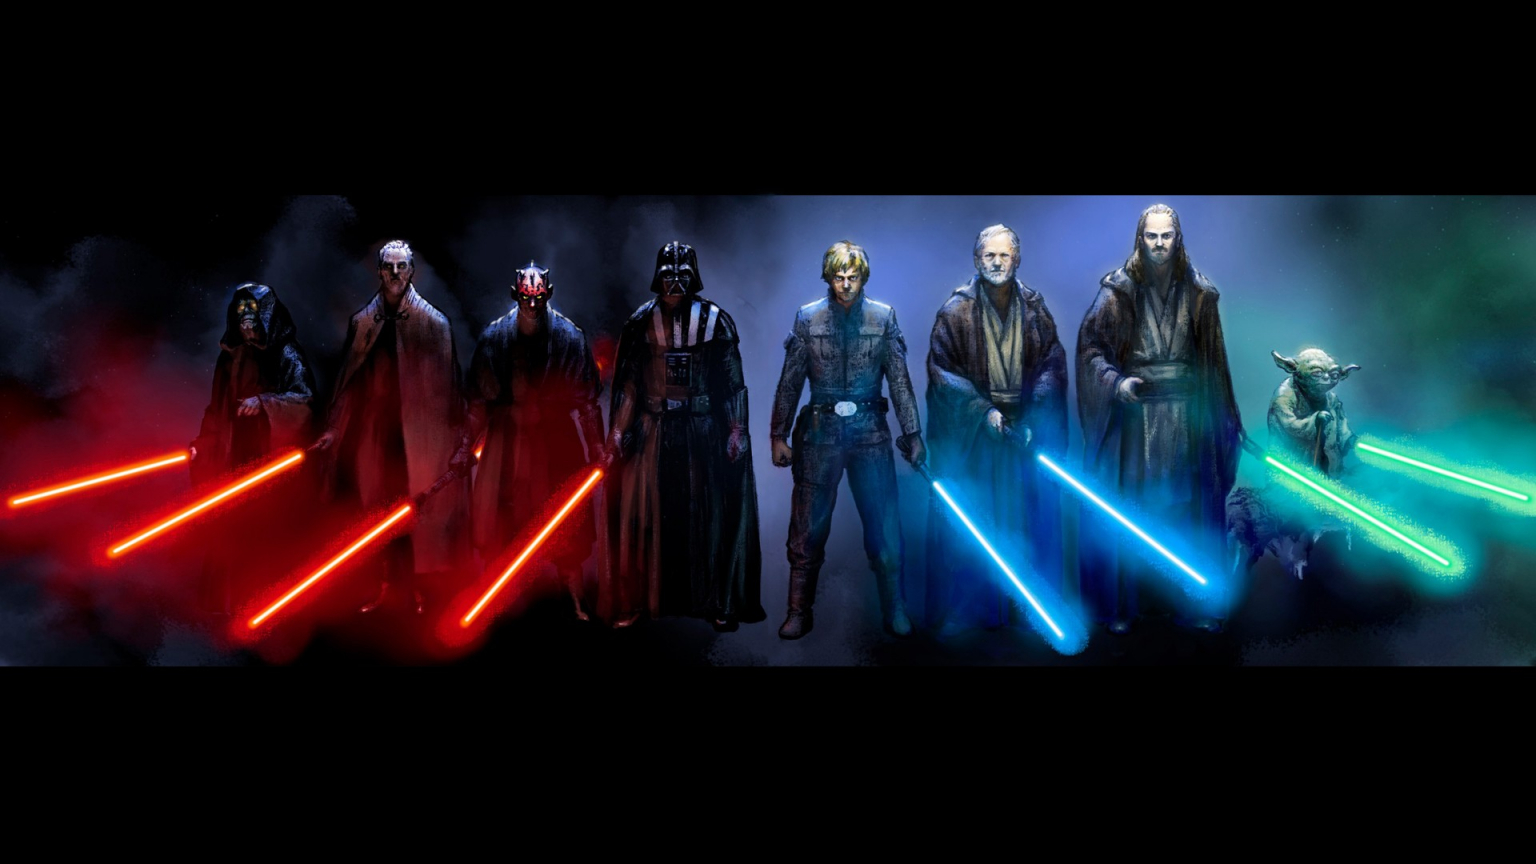 Free download Largest Collection of Star Wars Wallpaper For Download [1920x1080] for your Desktop, Mobile & Tablet. Explore Star Wars Clone Wars Wallpaper. Animated Star Wars Wallpaper, Surface Wallpaper